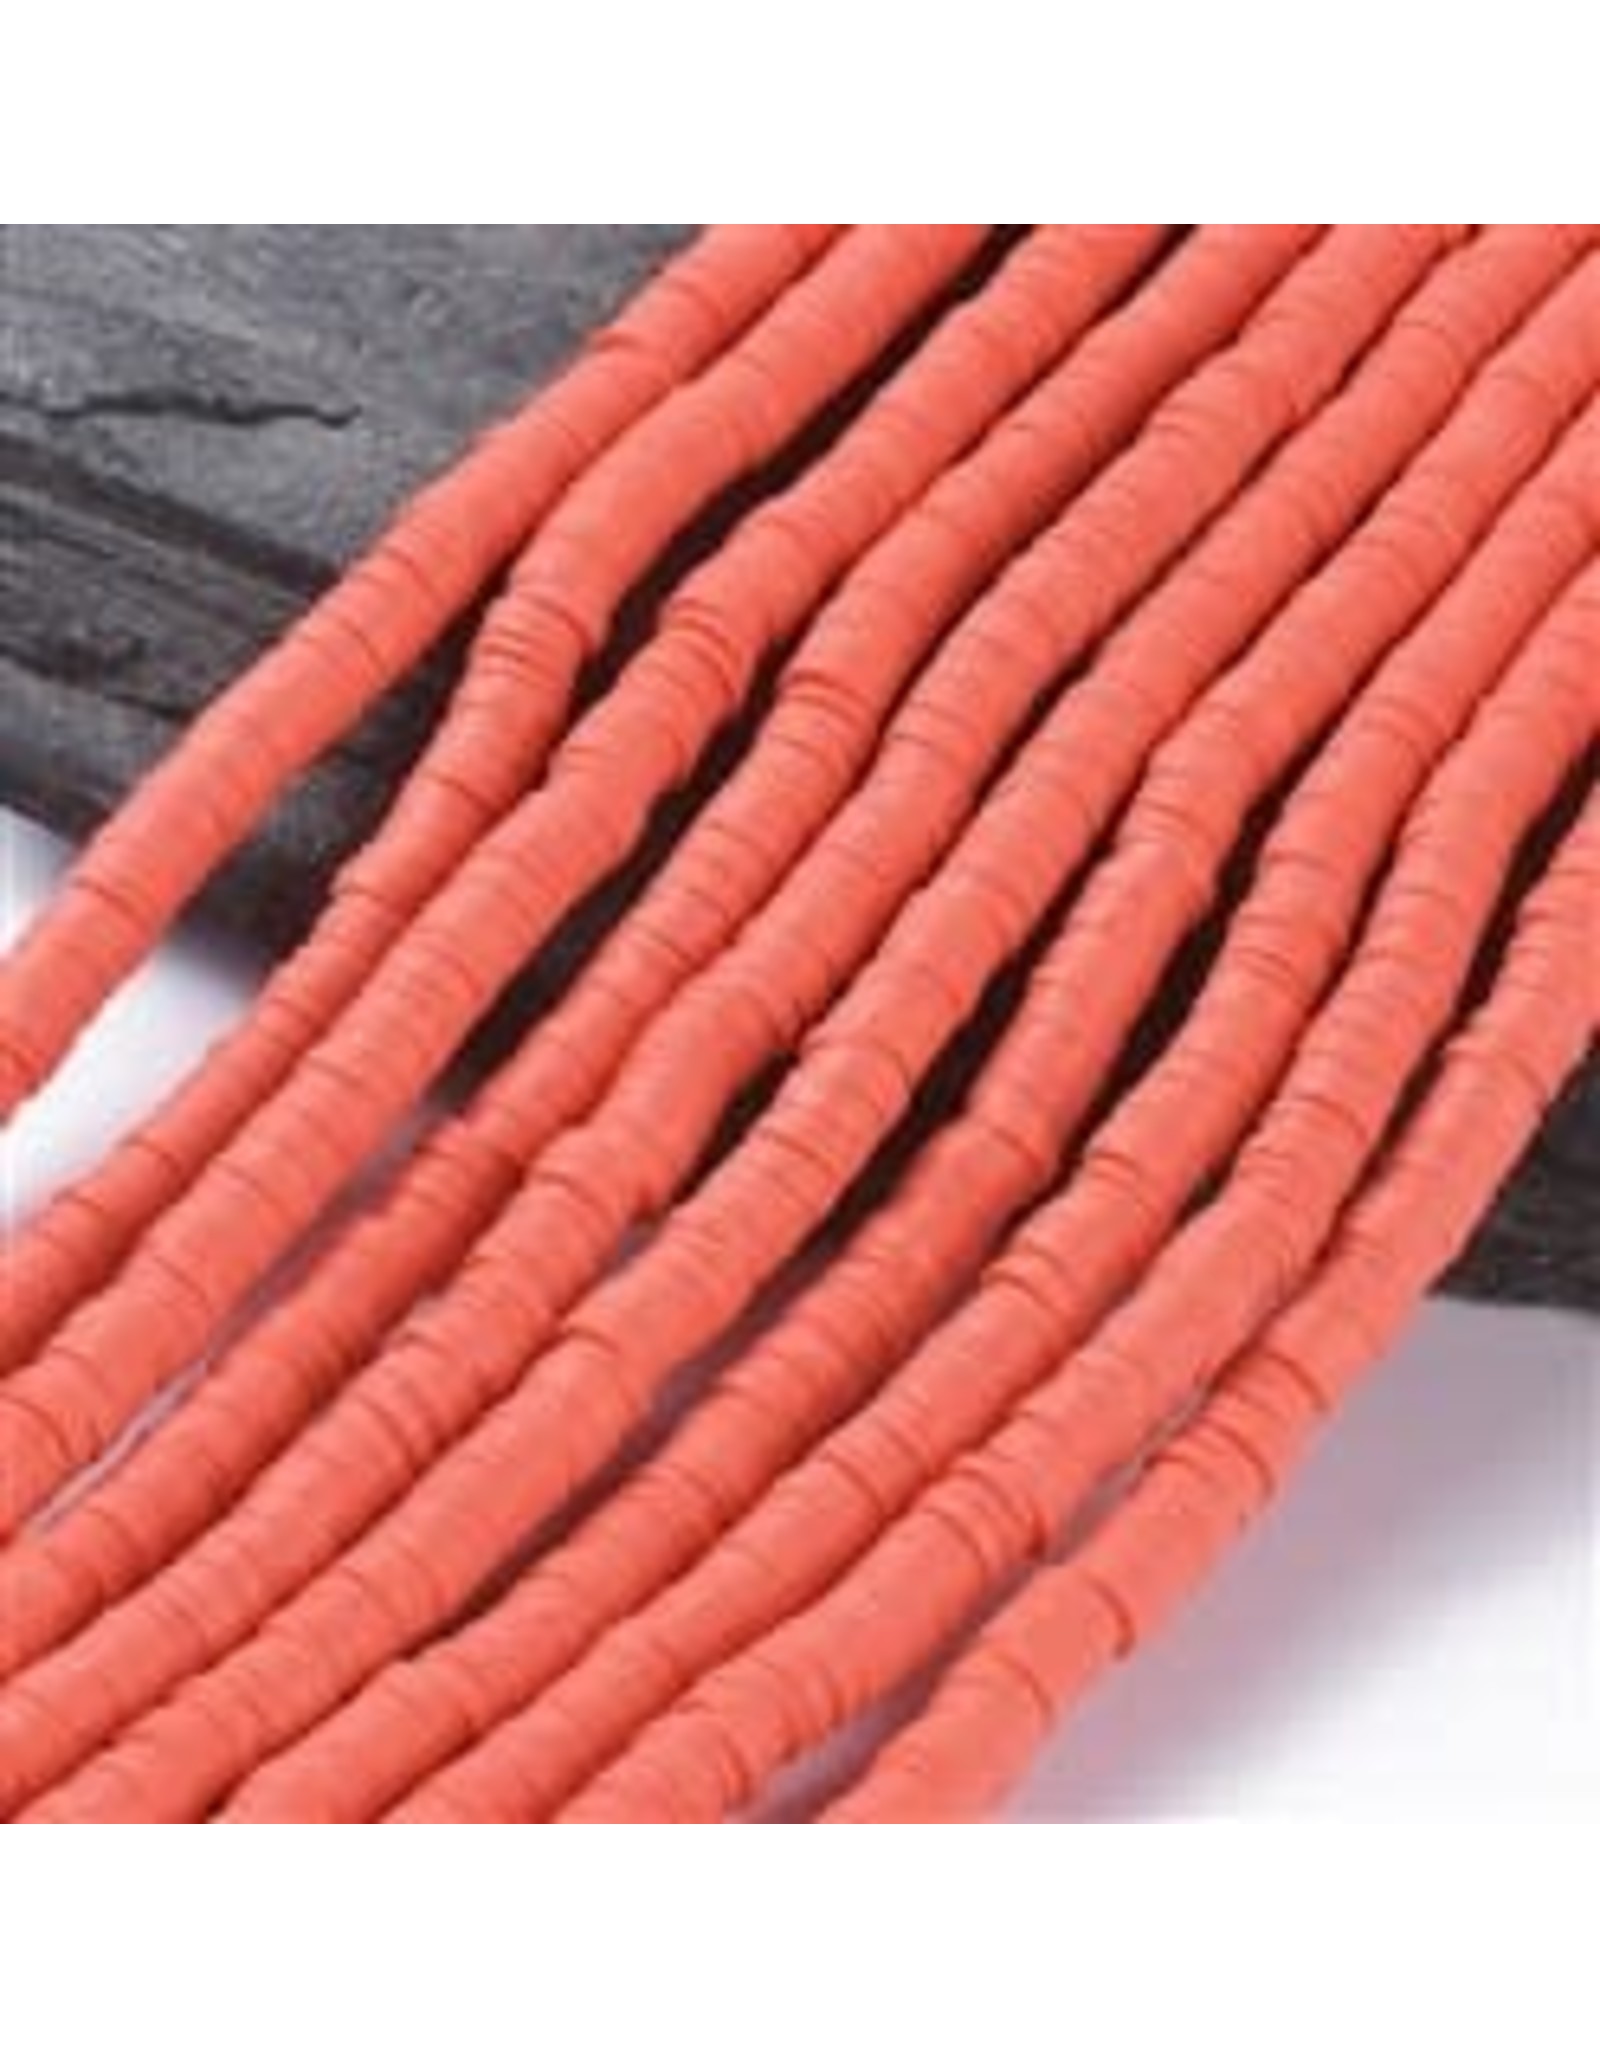 Polymer Clay 6mm Heishi Light Coral  approx  x380